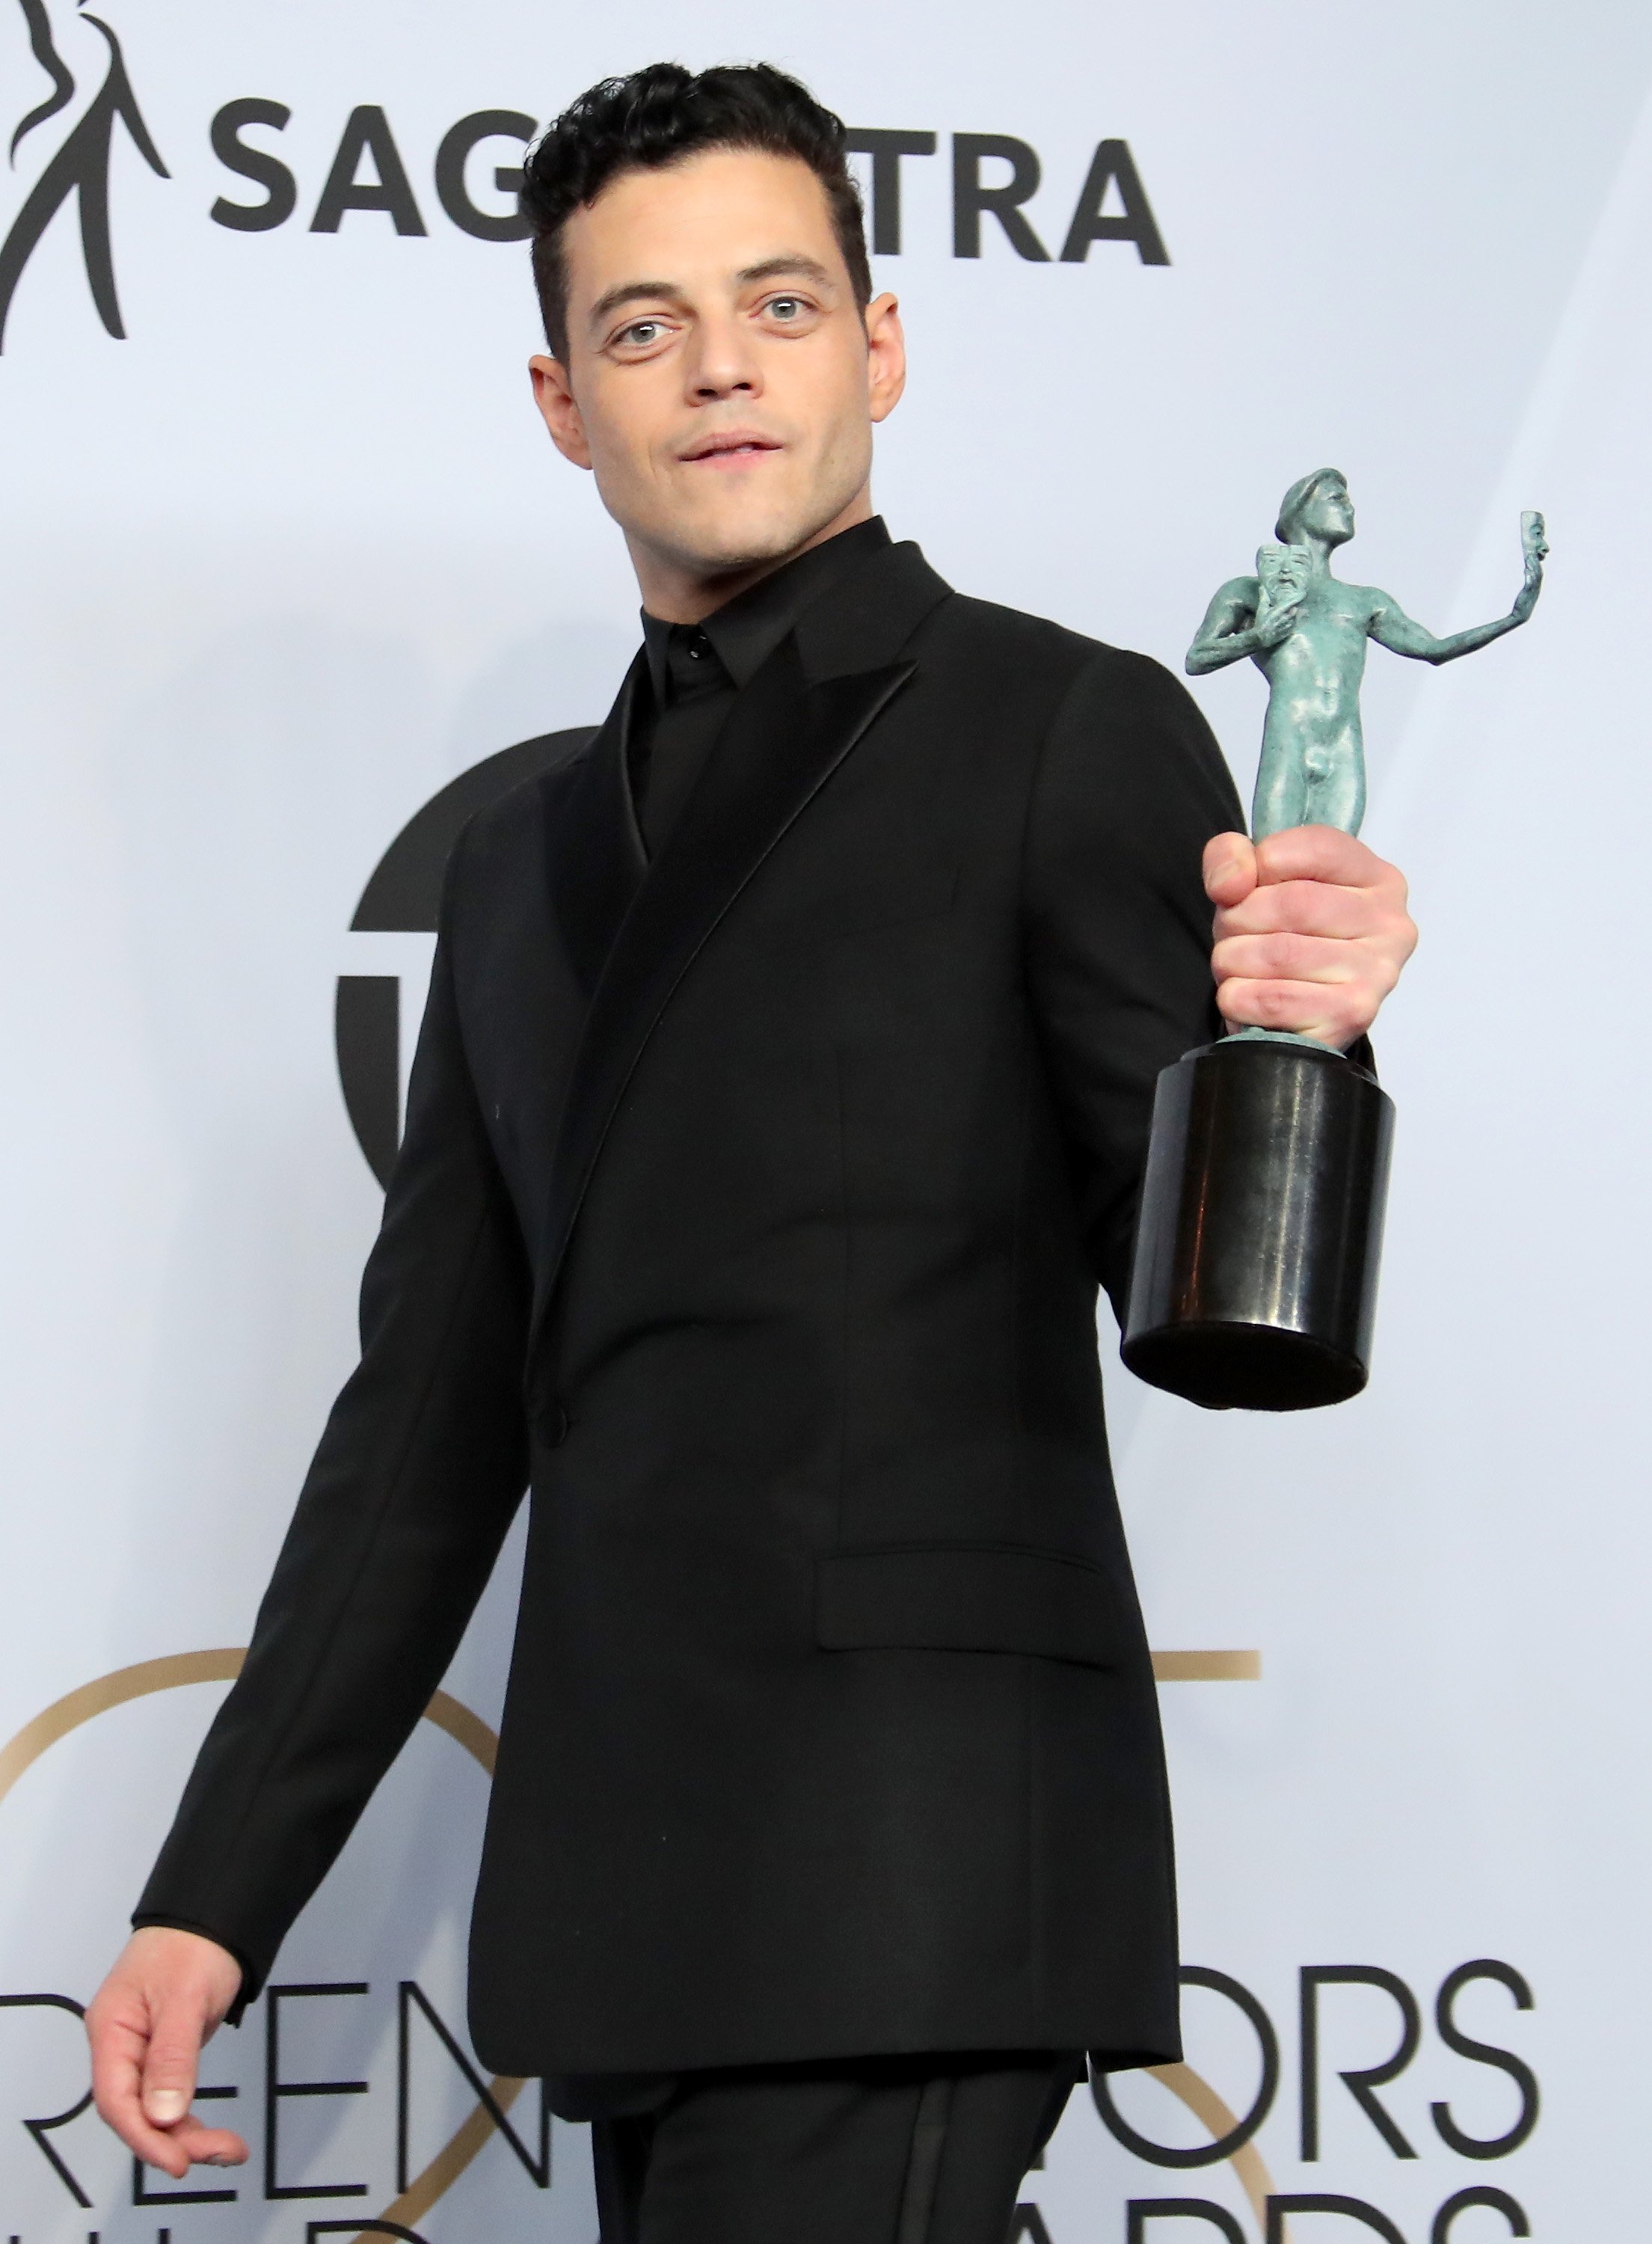 Rami Malek holds his award at the 25th Annual Screen Actors Guild Awards on January 27, 2019 in Los Angeles, California. | Photo: Getty Images